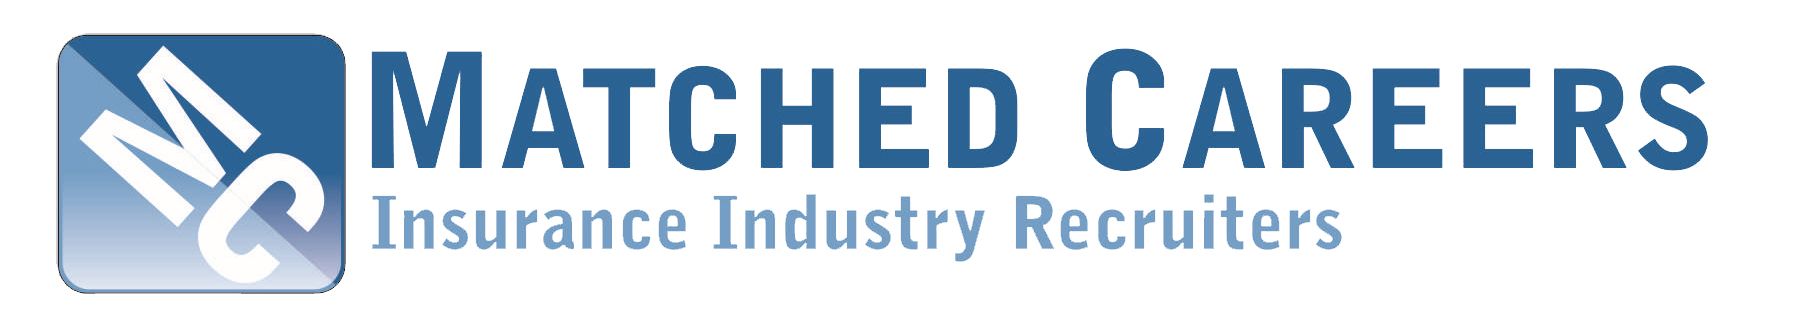 MATCHED CAREERS logo